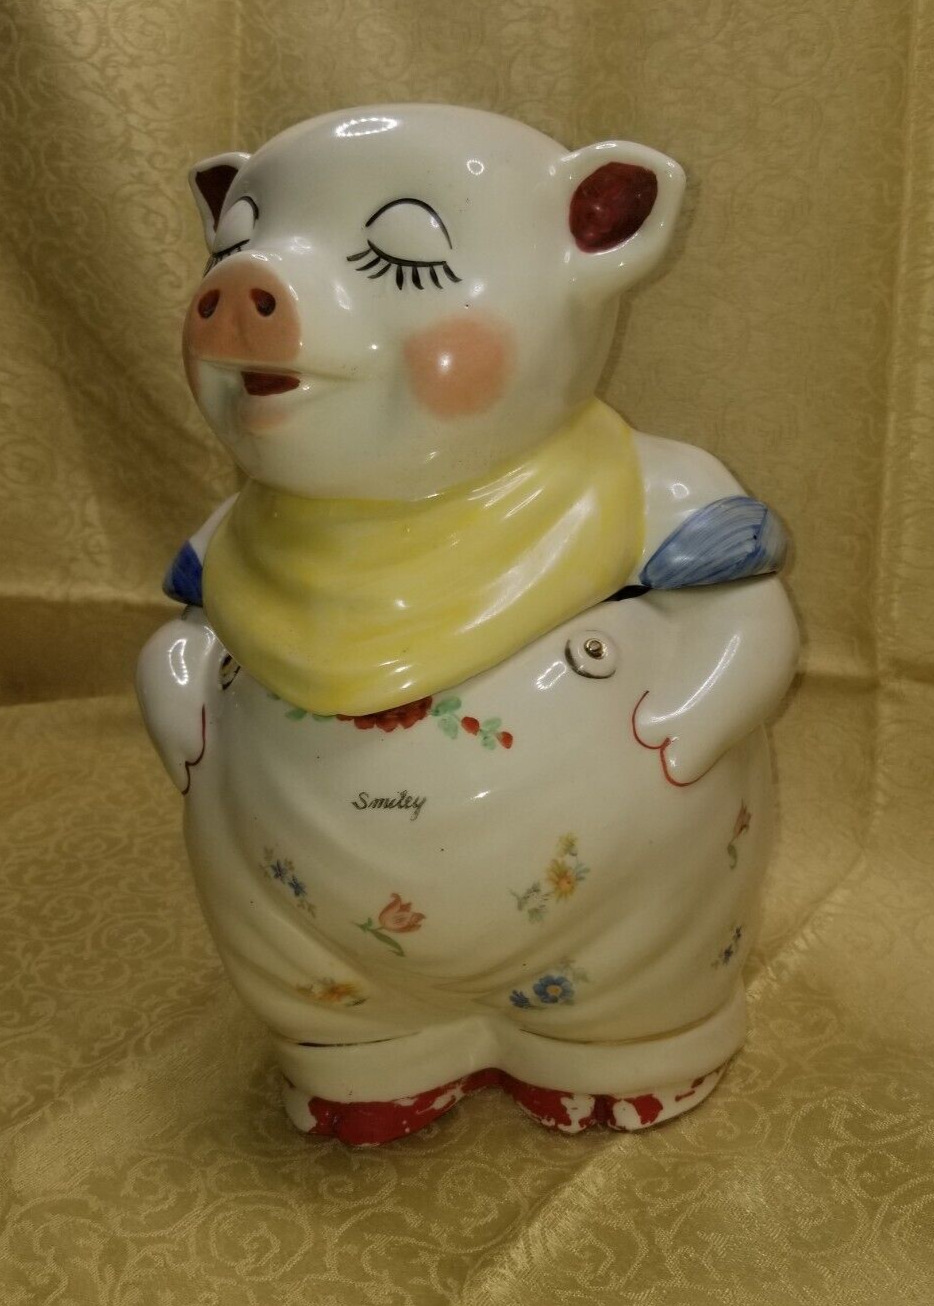 SMILEY PIG COOKIE JAR YELLOW SCARF SHAWNEE POTTERY Vintage 1940\'s made in USA